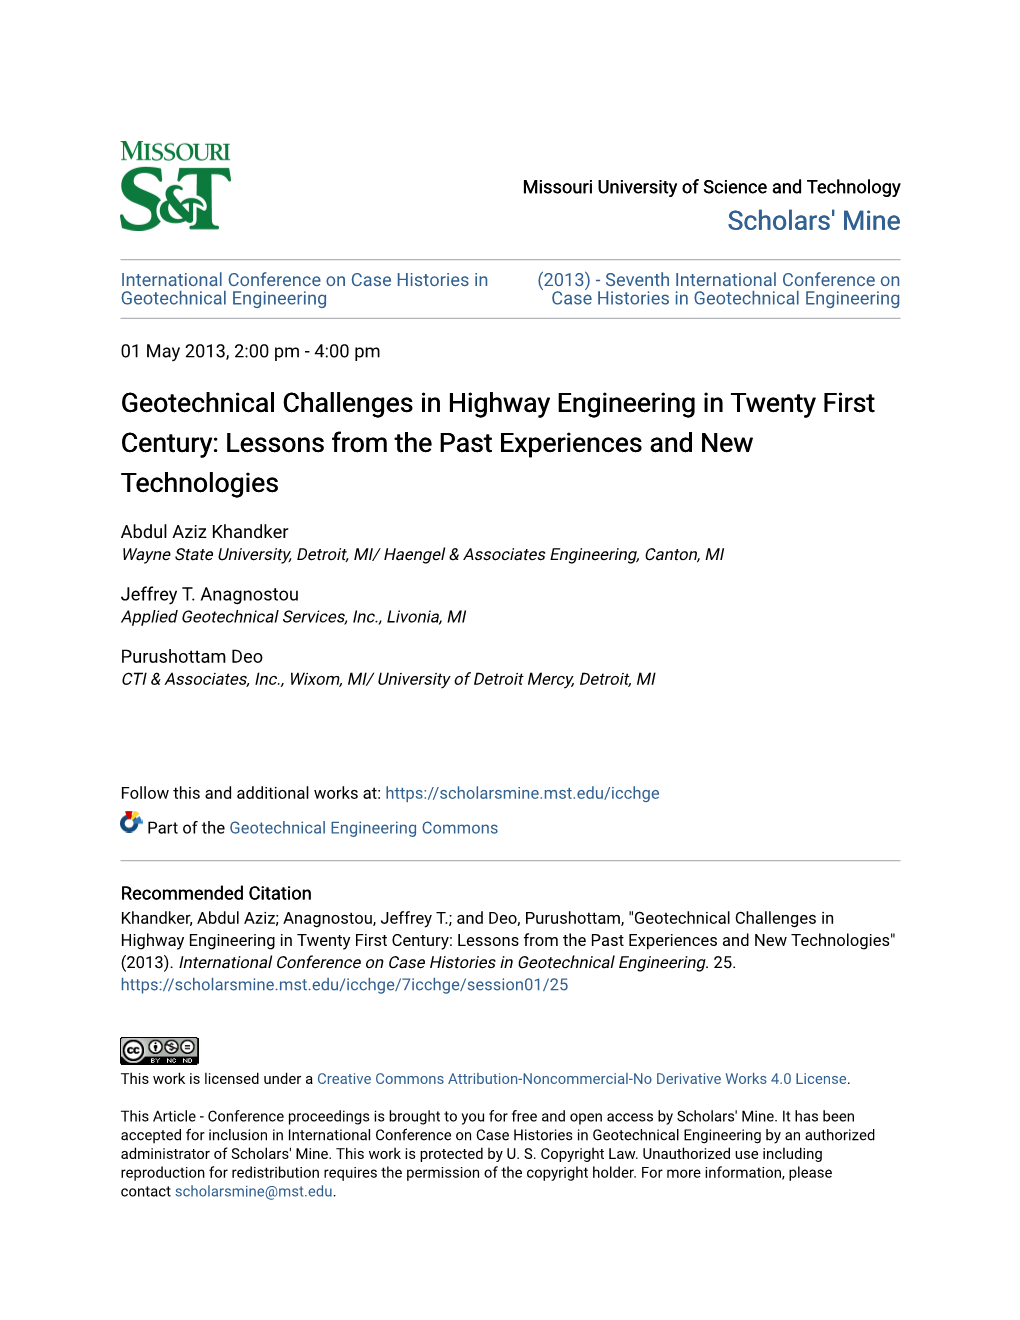 Geotechnical Challenges in Highway Engineering in Twenty First Century: Lessons from the Past Experiences and New Technologies